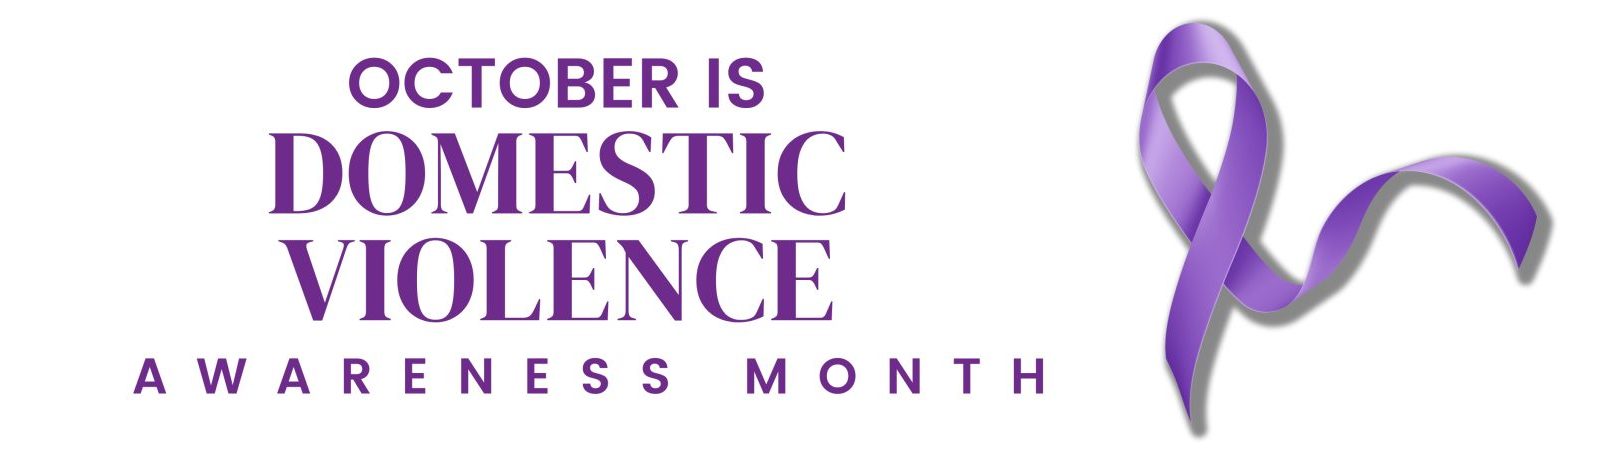 October is Domestic Violence Awareness Month title with purple ribbon